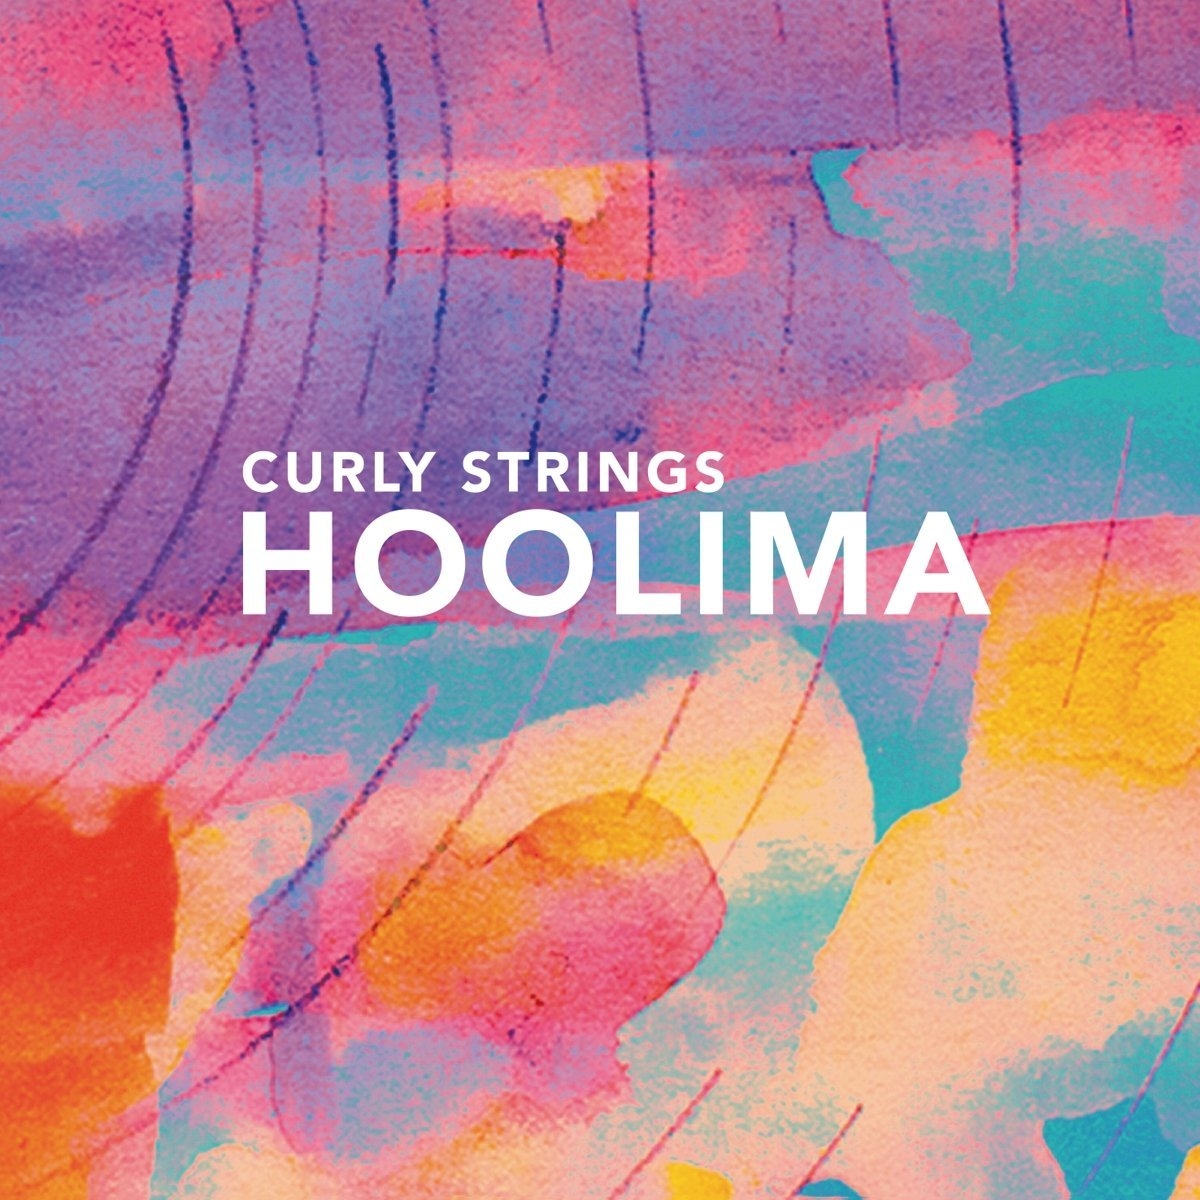 world 07 18 Curly Strings